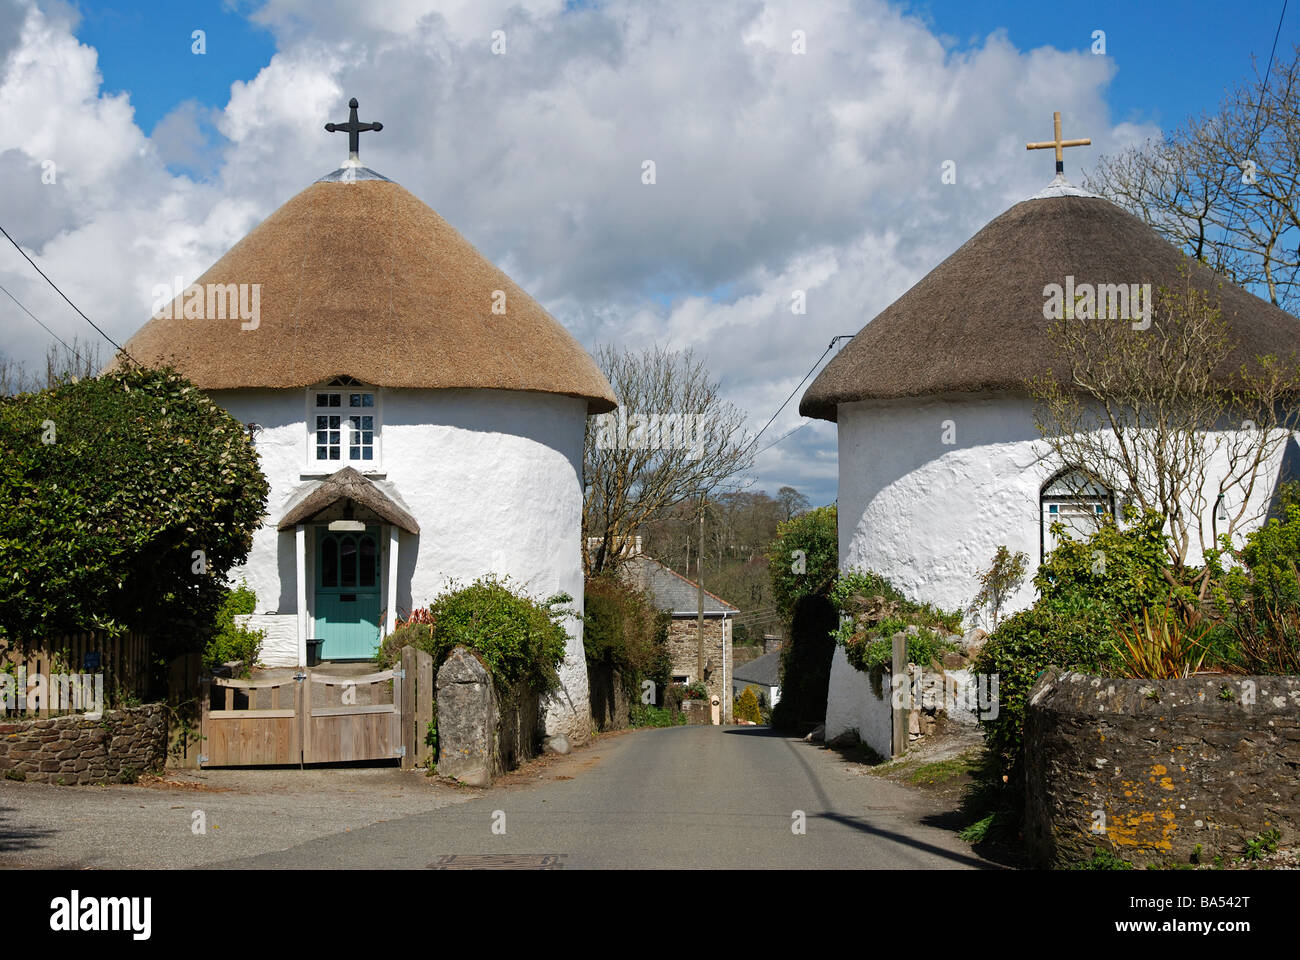 the roundhouses at the entrance to the village of veryan in cornwall,uk Stock Photo